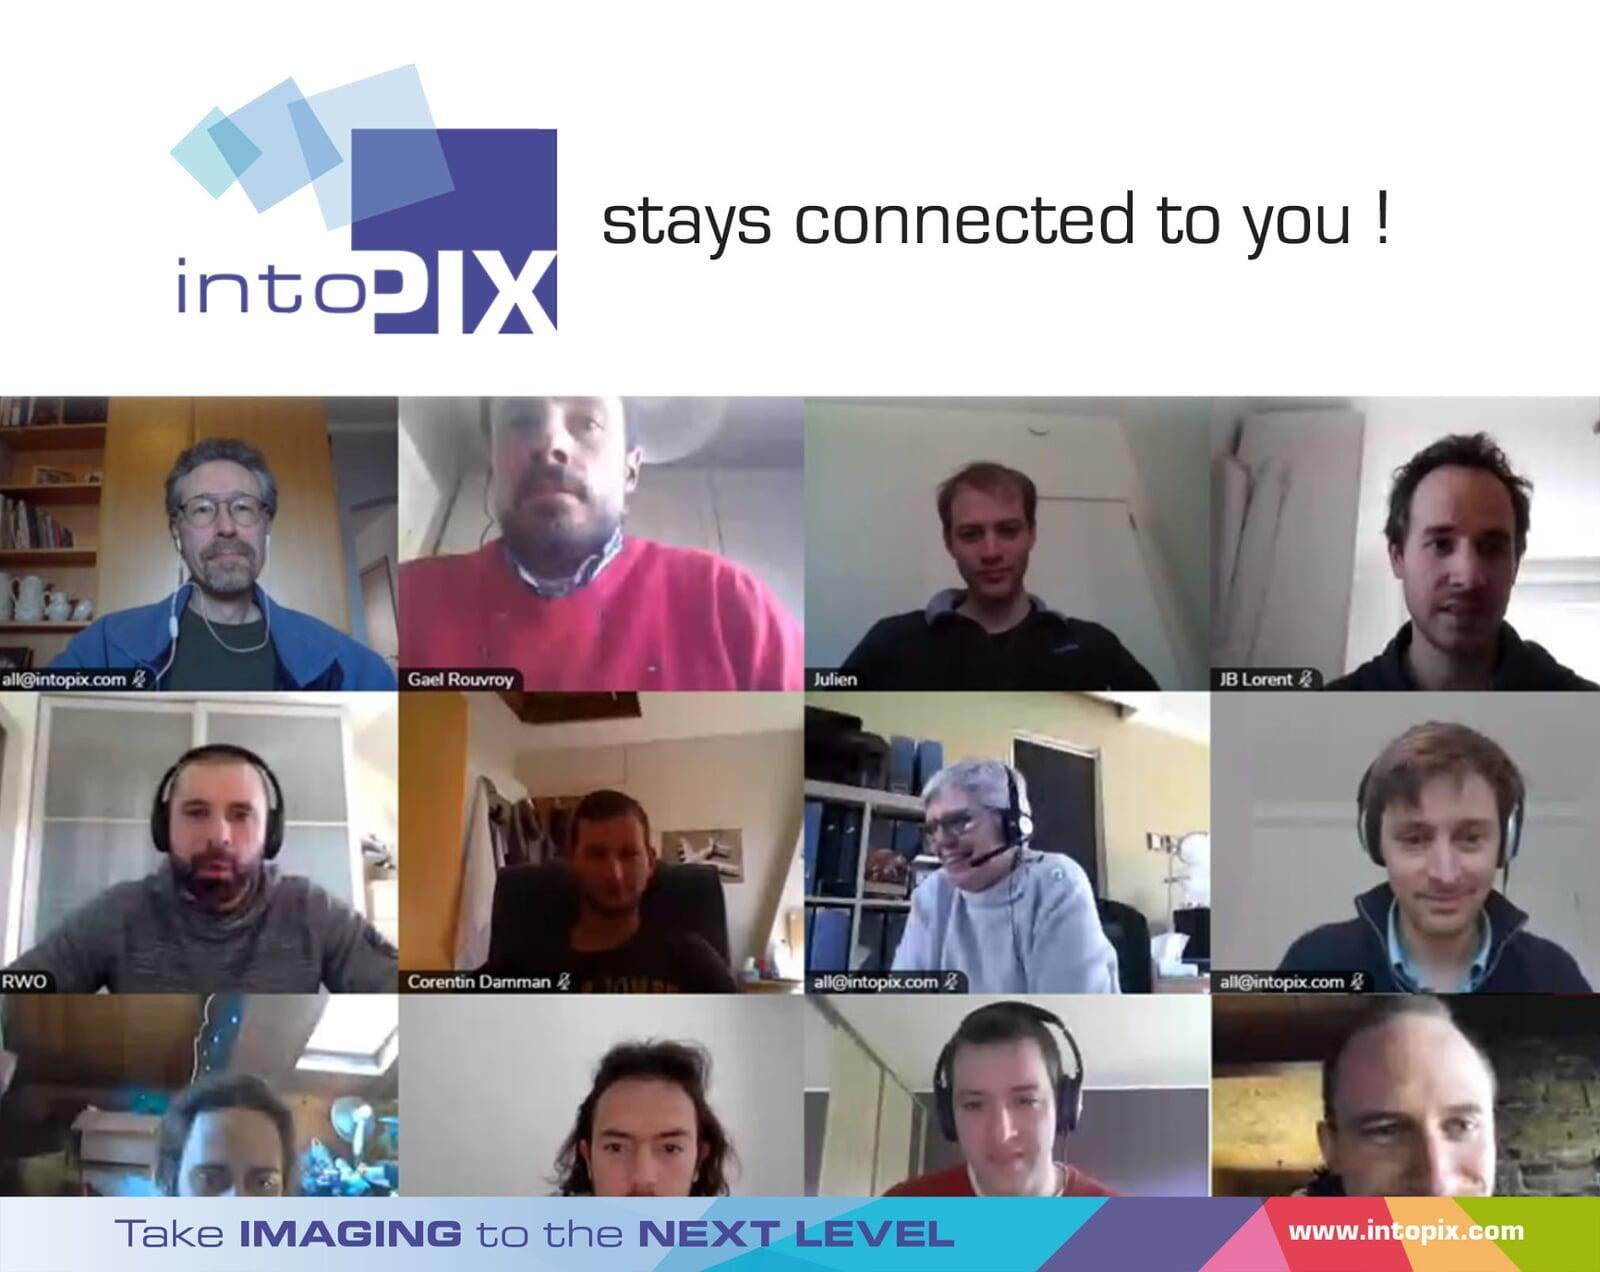 intoPIX stays connected to you during COVID-19